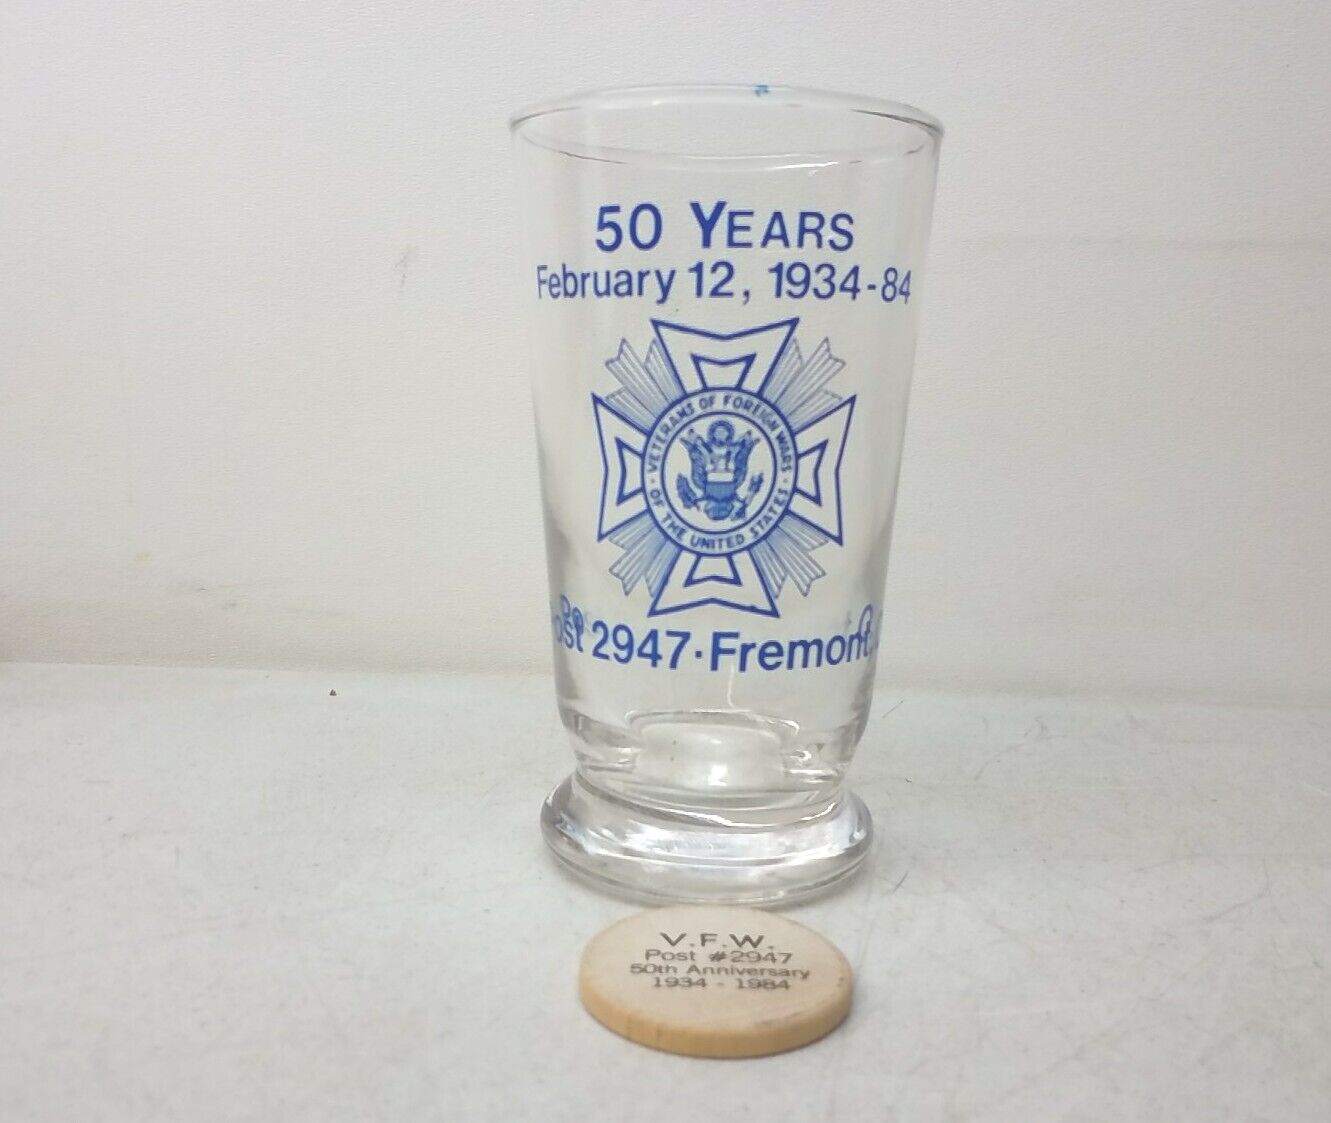 VFW Post 2947 50th Anniversary Glass And Wooden Nickel Commemorative 1934-1984